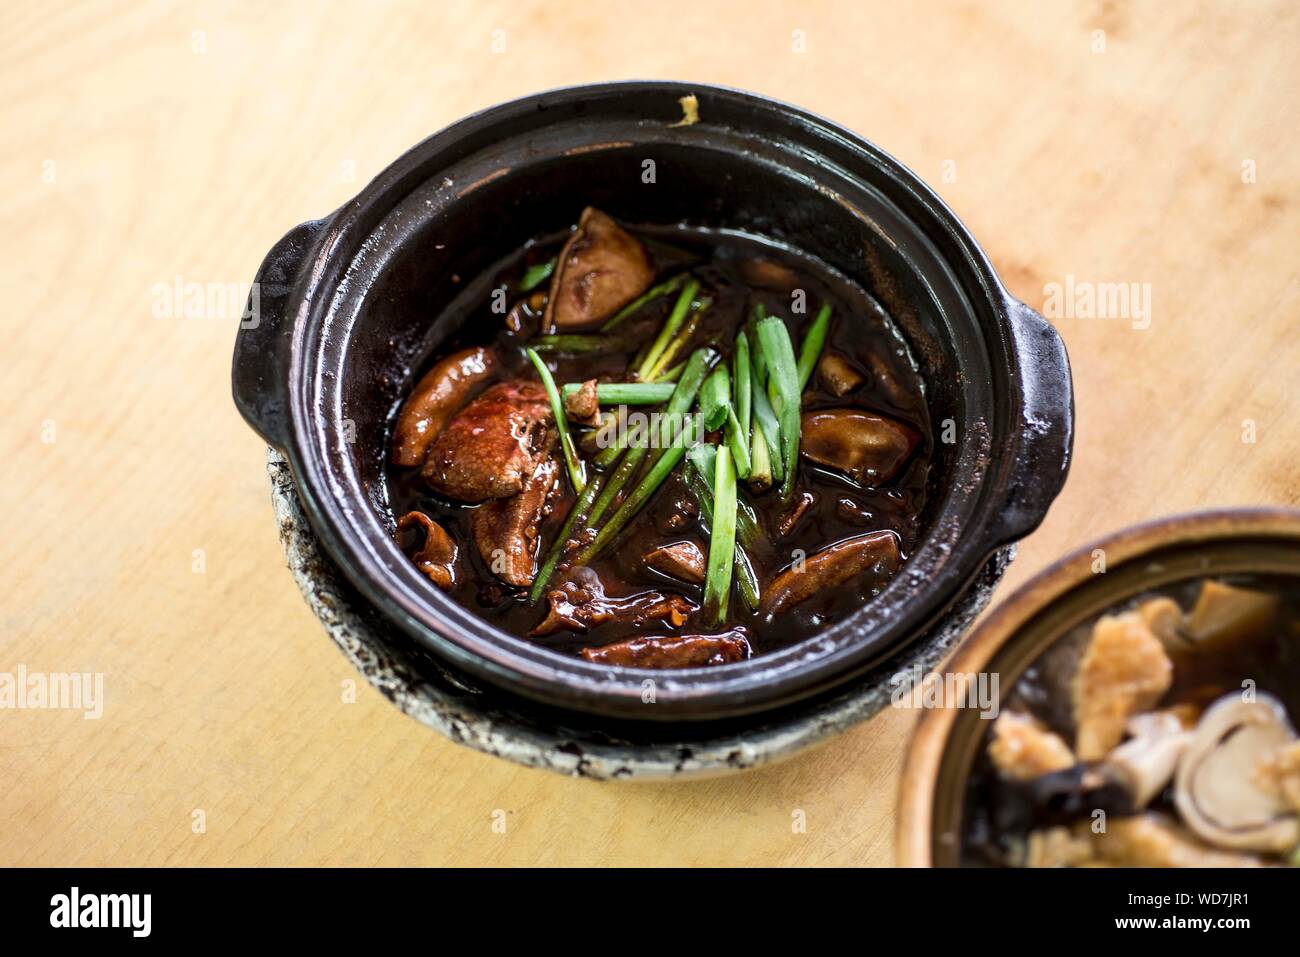 High Angle View Of Livers Served In Clay Pot On Table Stock Photo